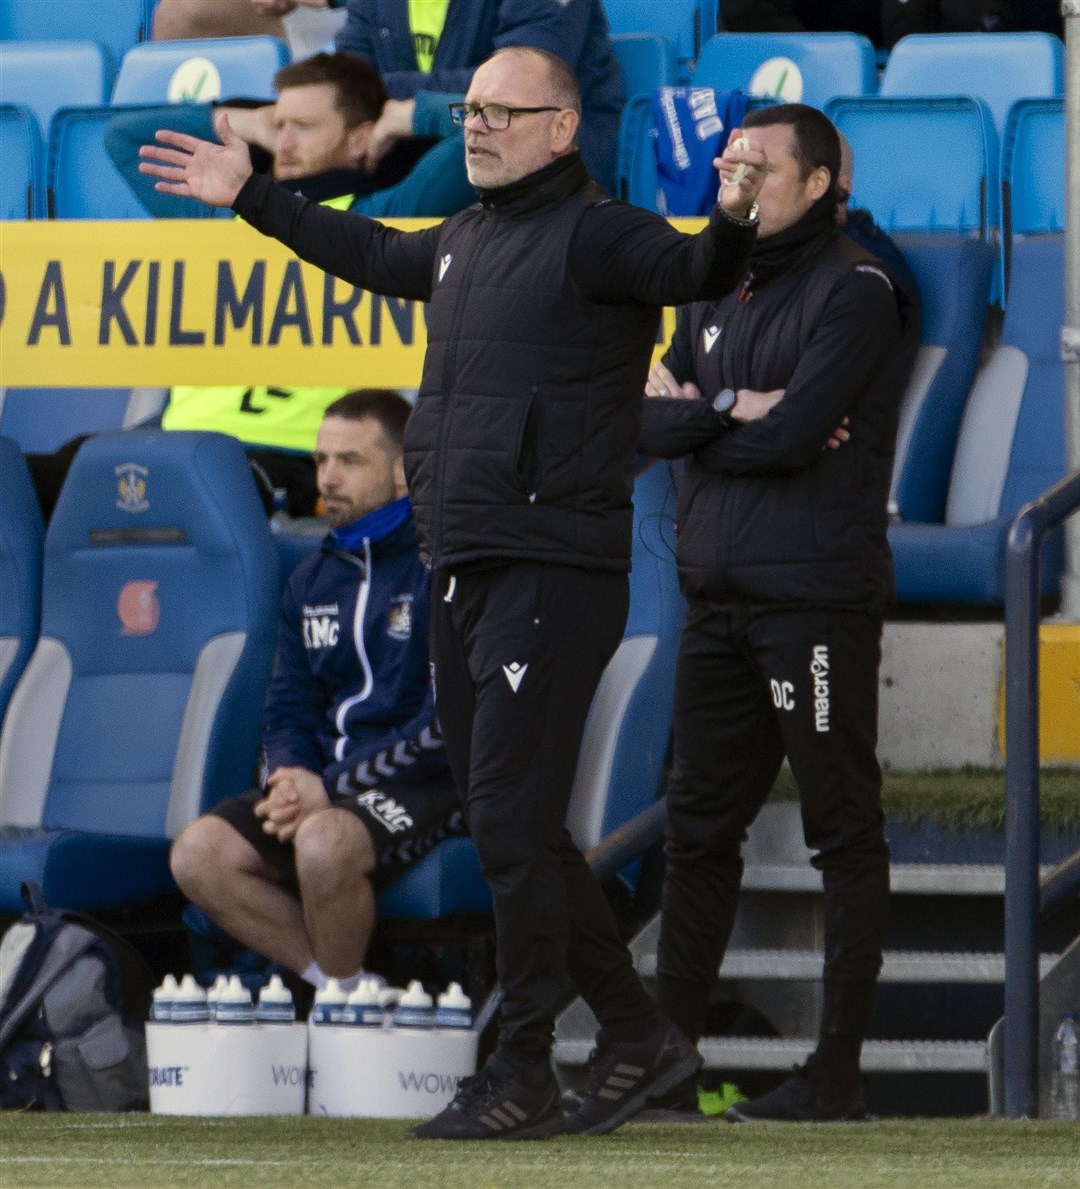 Picture - Ken Macpherson, Inverness. Kilmarnock(2) v Ross County(2). 10.04.21. Ross County manager John Hughes.